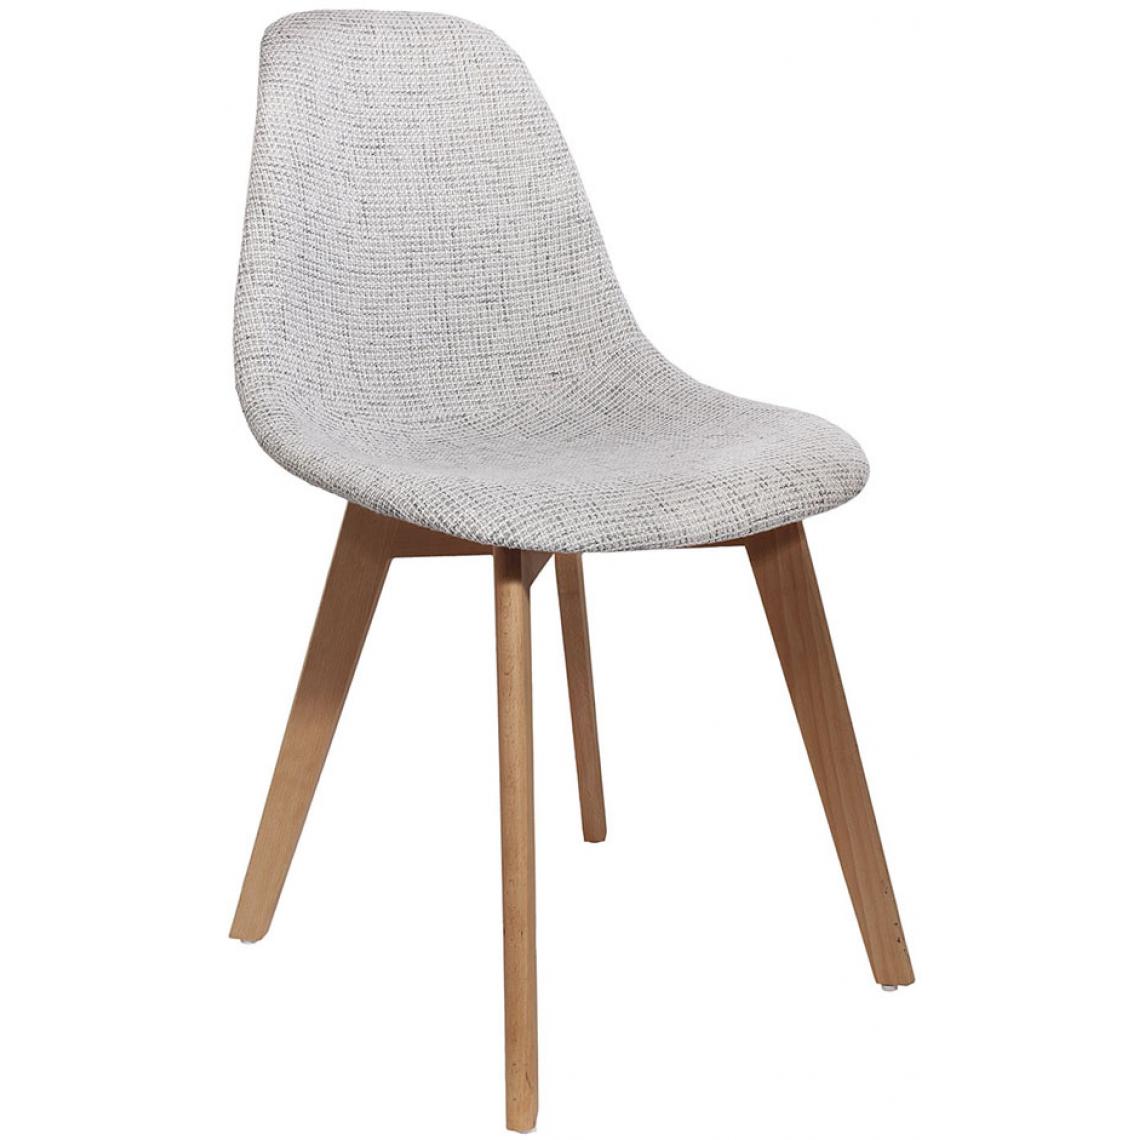 3S. x Home - Chaise Scandinave en Maille Grise FJORD - Chaises